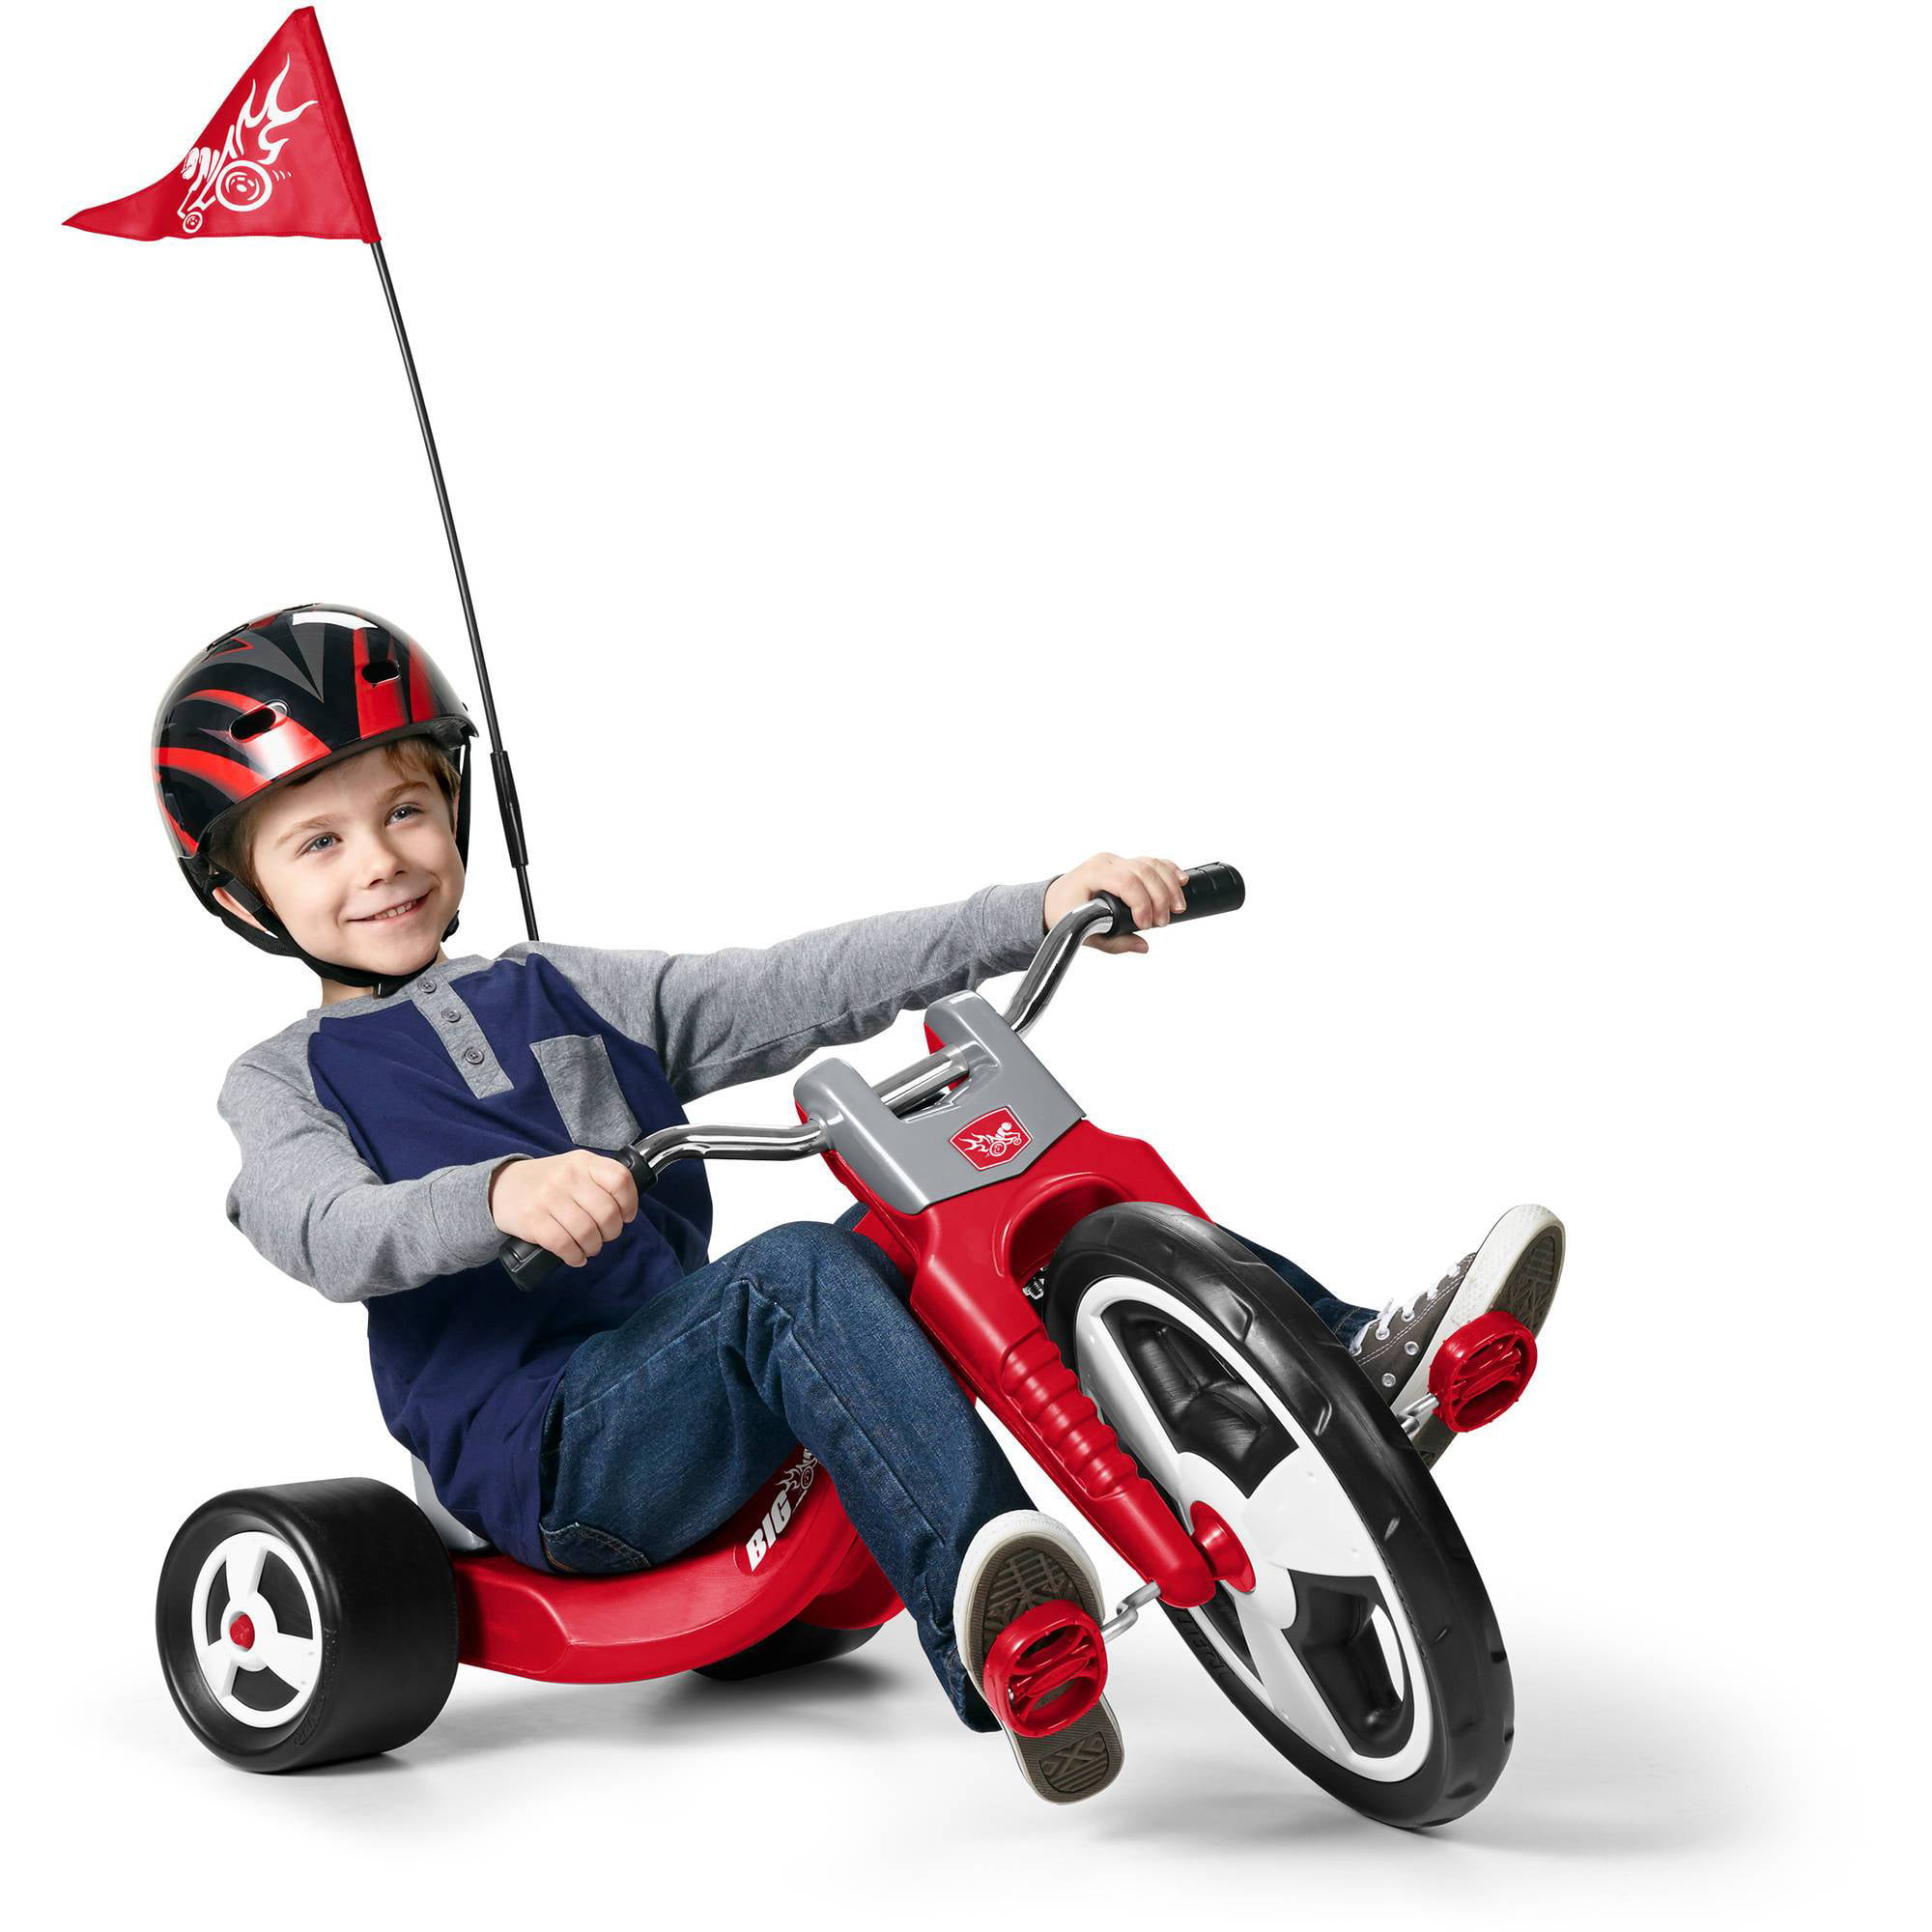 Kids Big Flyer Chopper Tricycle 16 in Front Wheel Adjustable Seat Sports Toy Red 